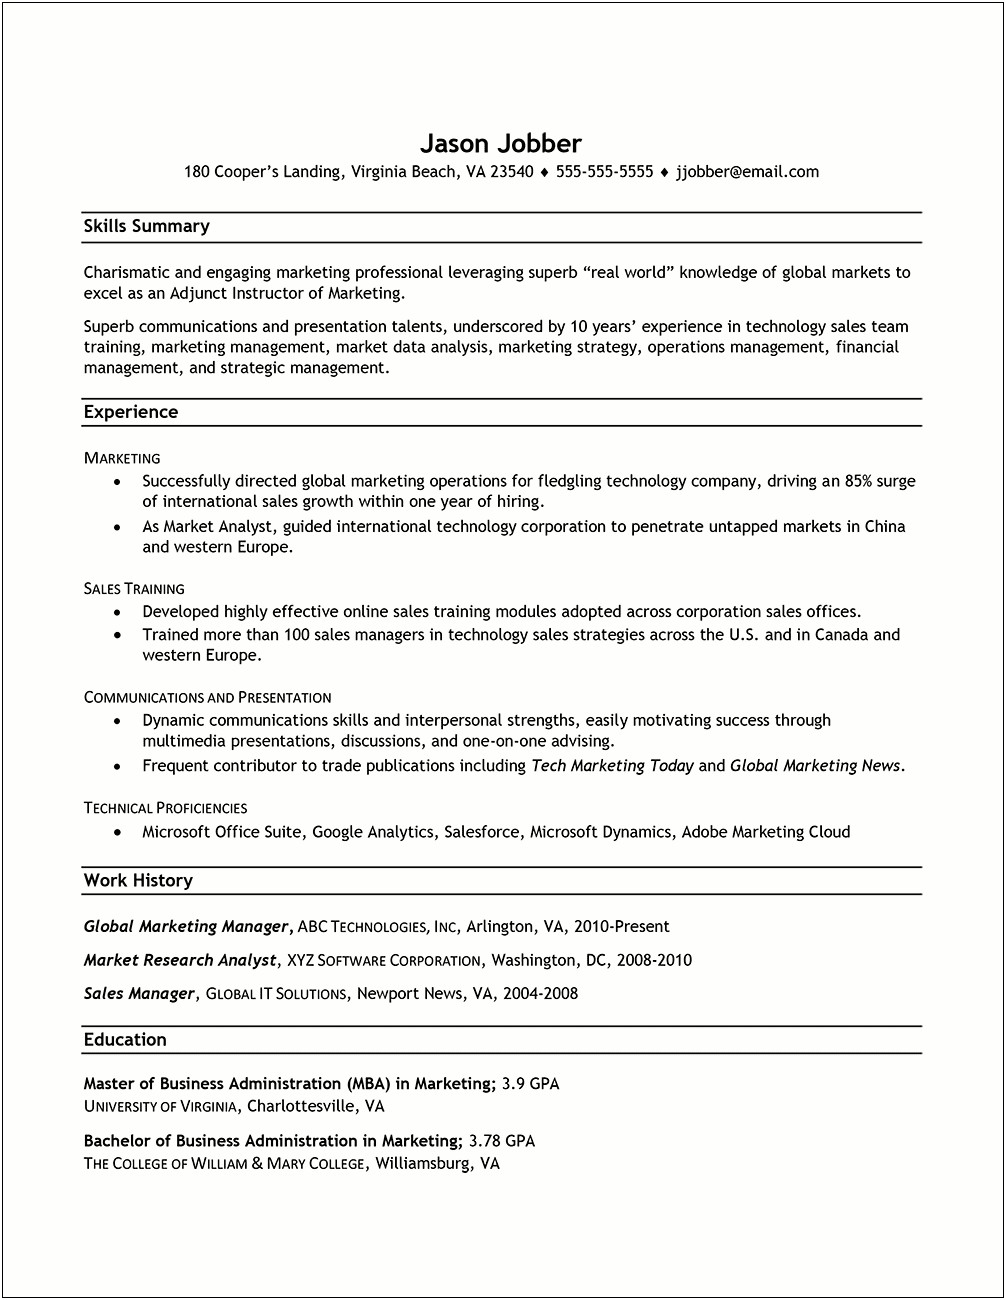 Example Resume Objective For Changing Careers